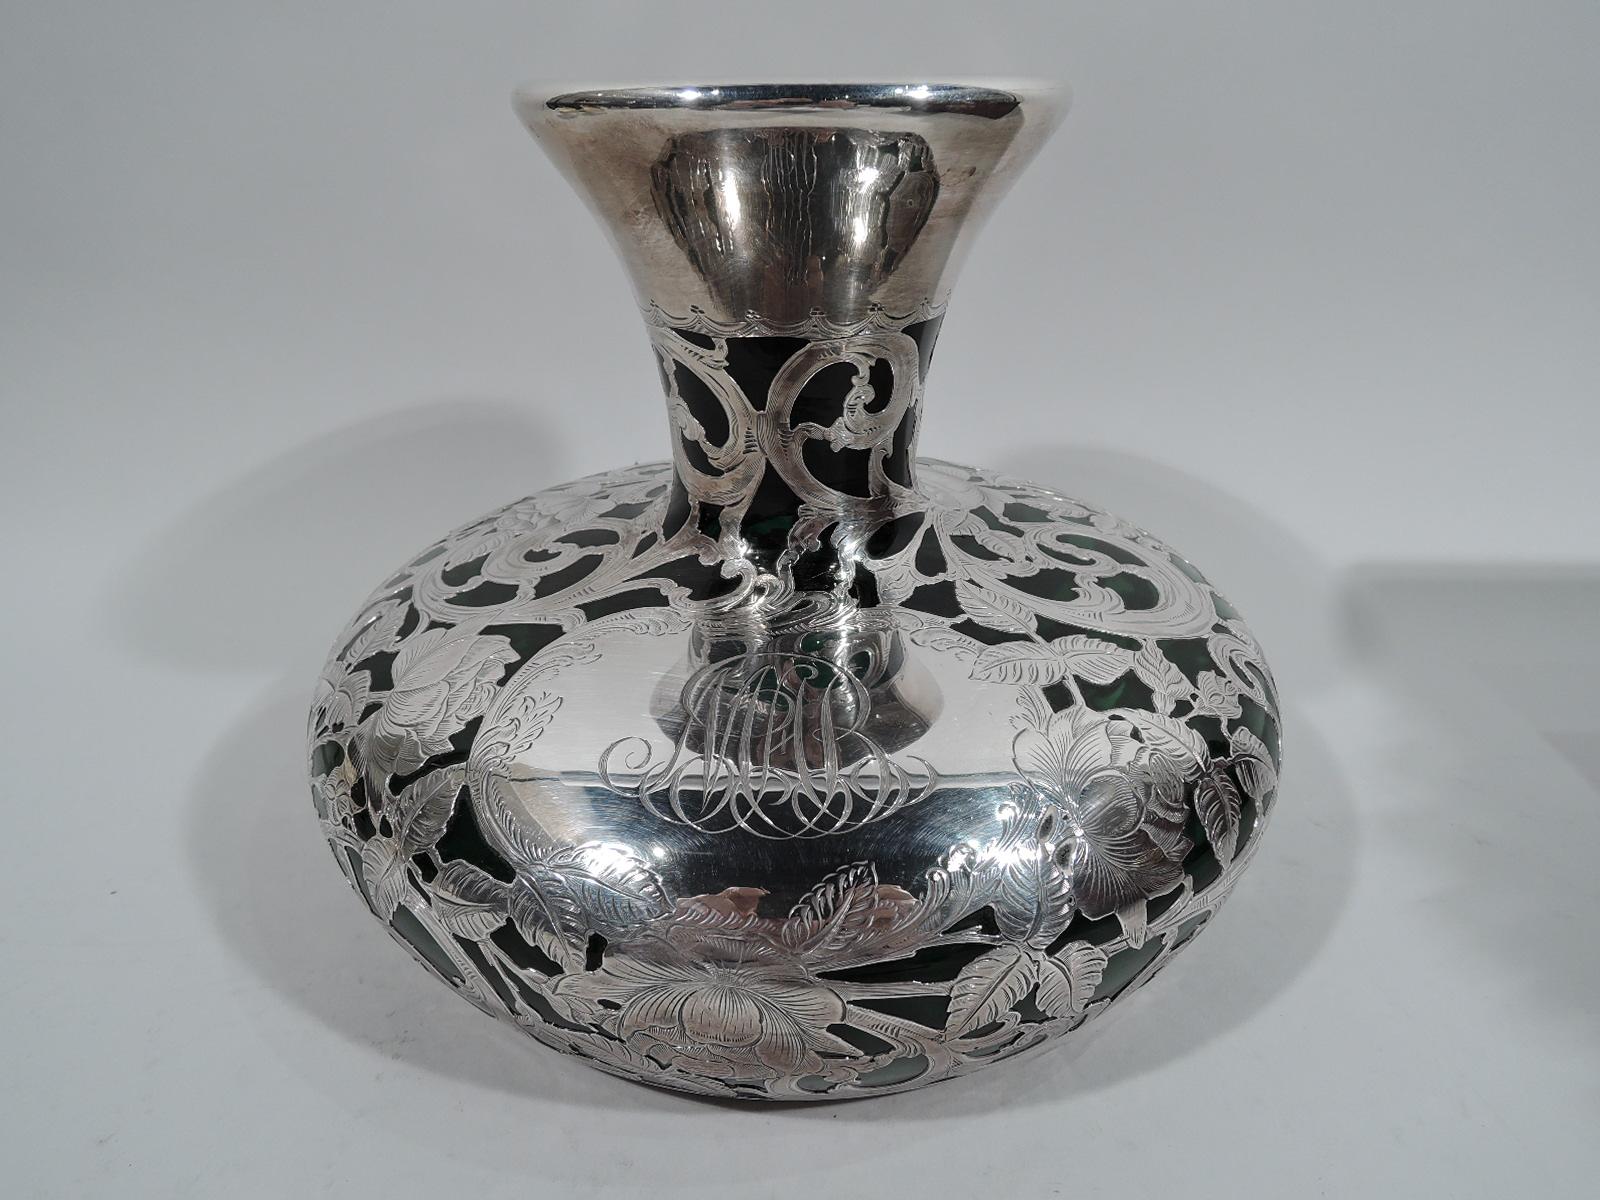 Large turn-of-the-century Art Nouveau glass vase with engraved silver overlay. Round and bellied with short and conical mouth and neck. Floral overlay with ripe blooms amidst dense leaves and scrolls. Scrolled cartouche engraved with interlaced